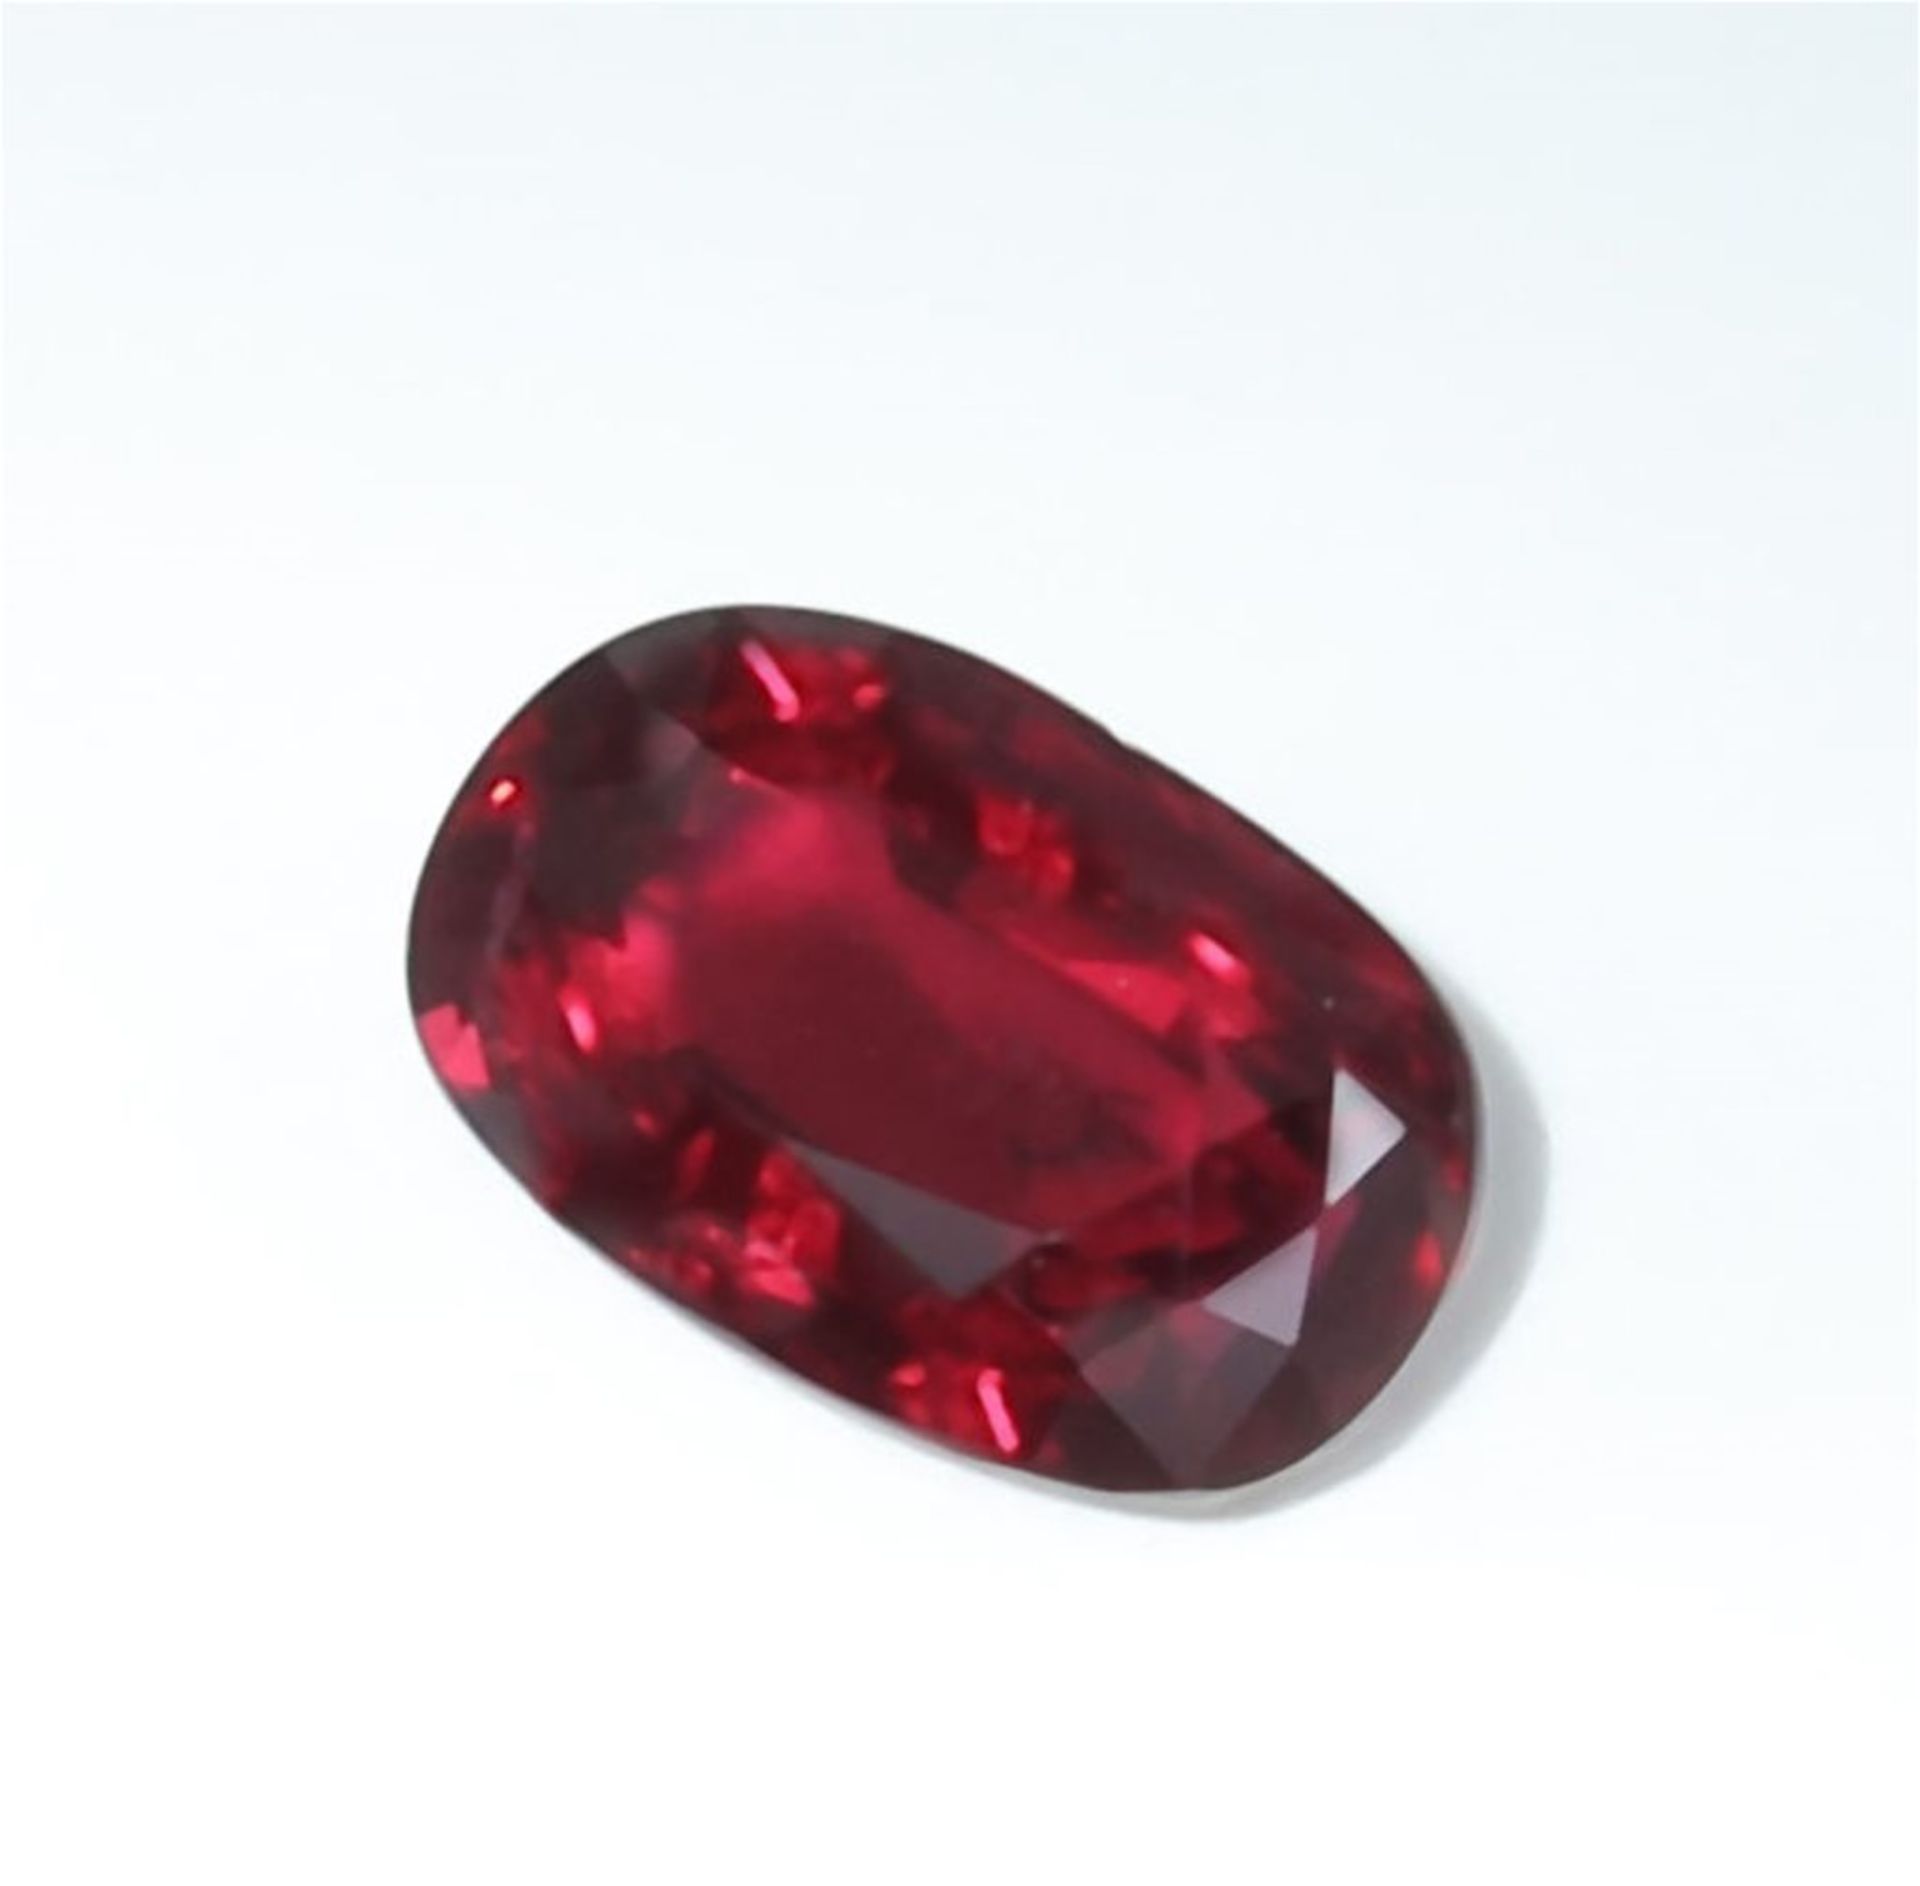 GRS Certified 5.02 ct. “Pigeon Blood” Ruby - Image 4 of 10